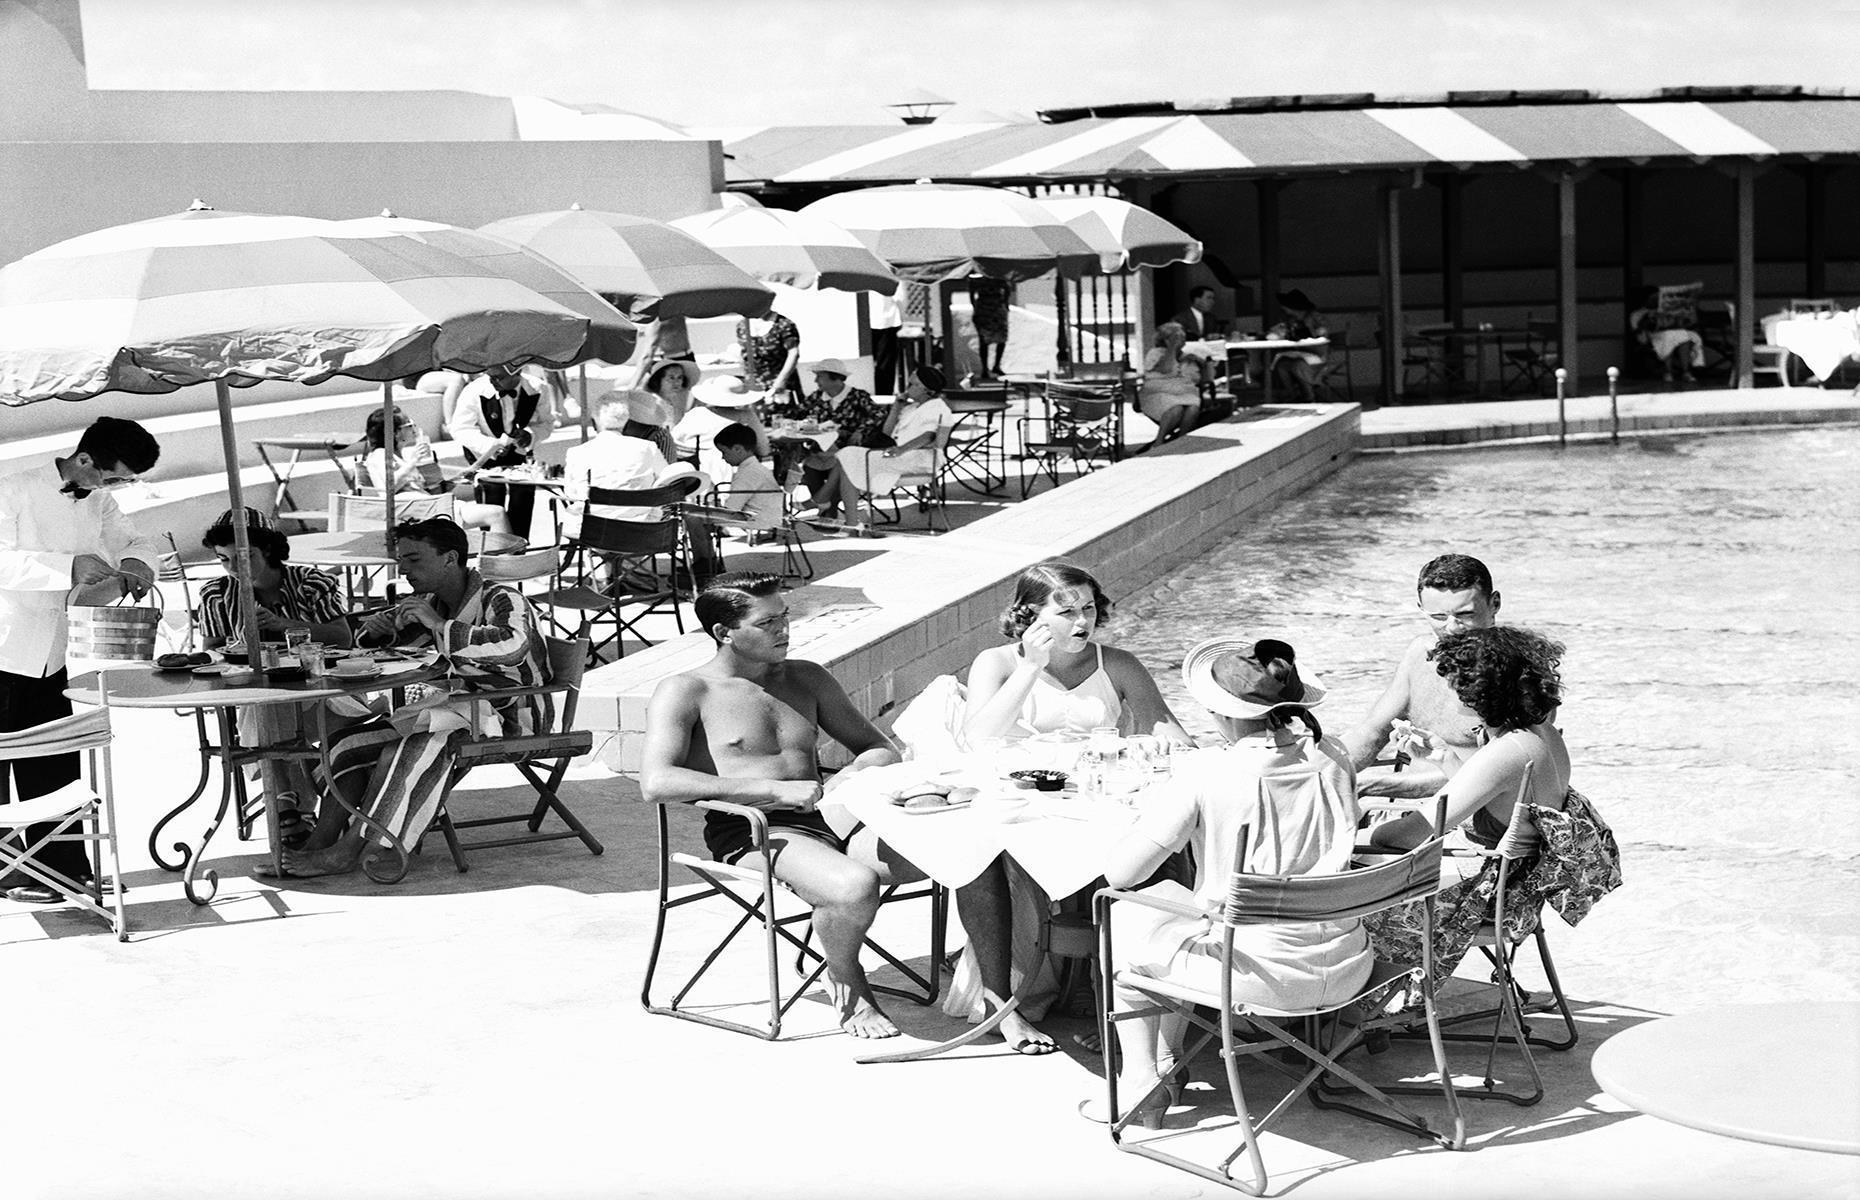 On the flipside, dozens of glitzy Art Deco hotels and resorts sprang up in Miami during the Roaring Twenties and wealthier vacationers flocked to the city's sand-trimmed shores like never before. This photo dates to the 1930s and captures a group of young vacationers having lunch by the pool at a Miami hotel.